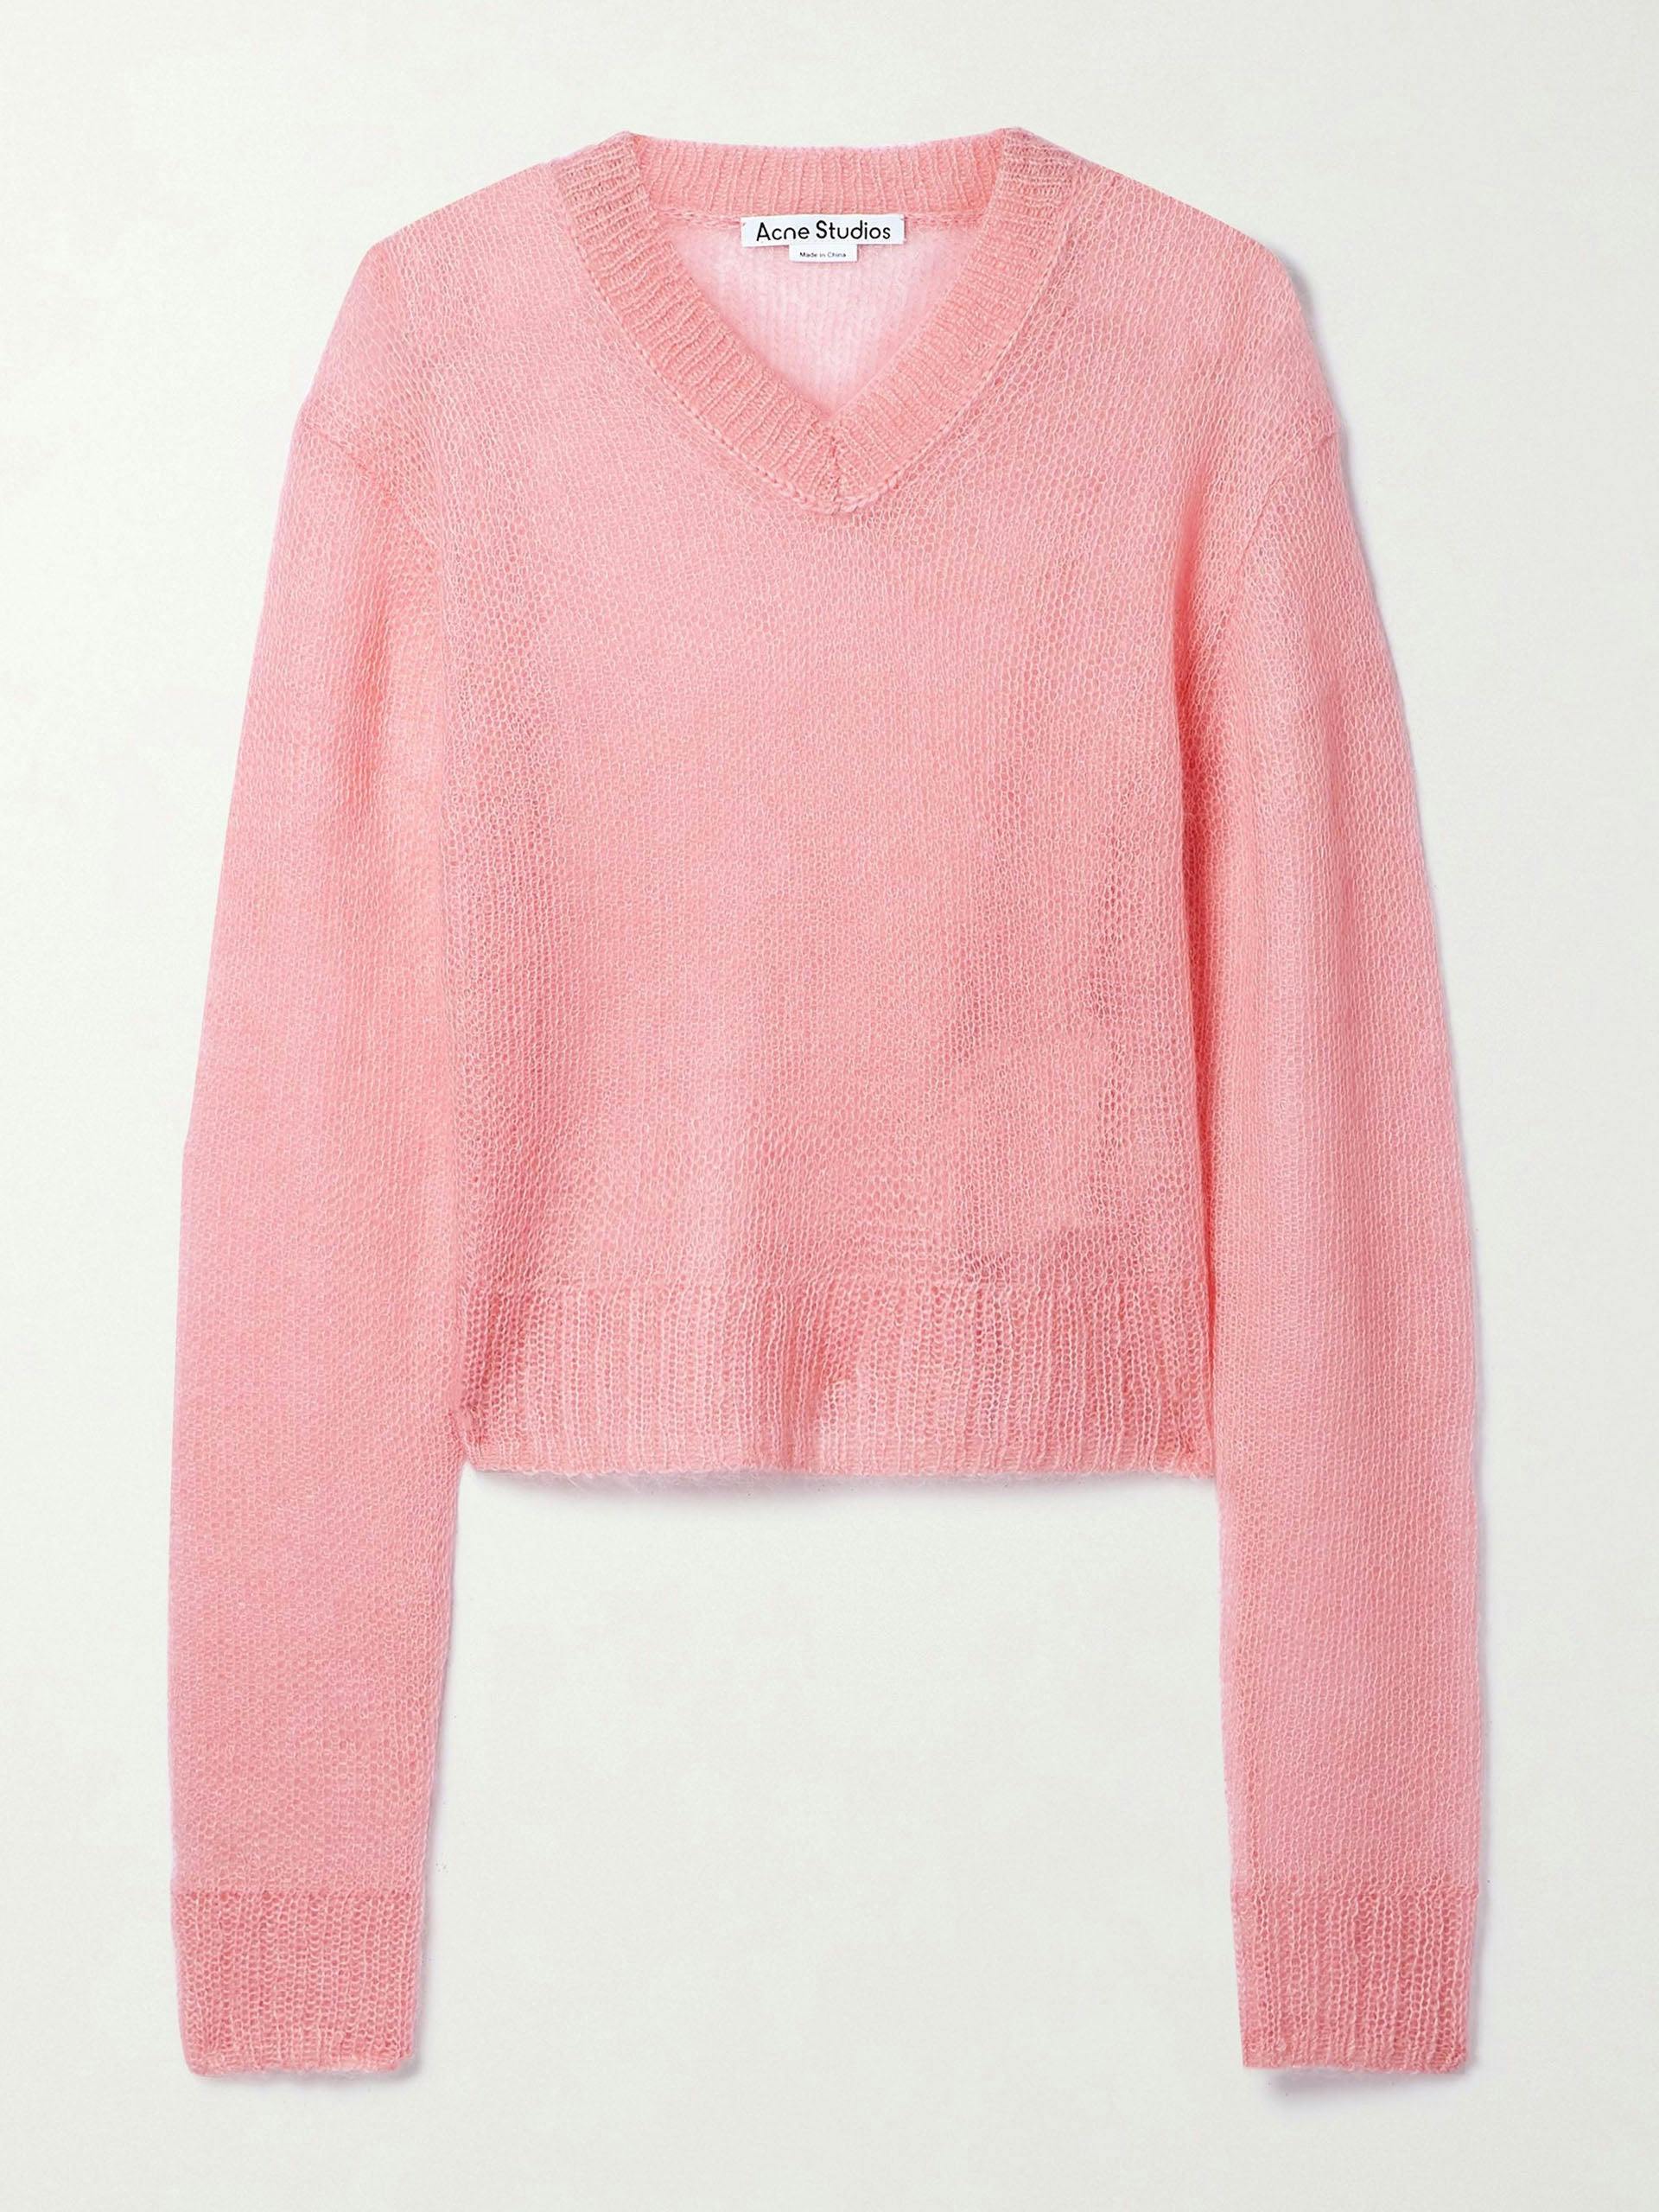 Cropped pink sweater